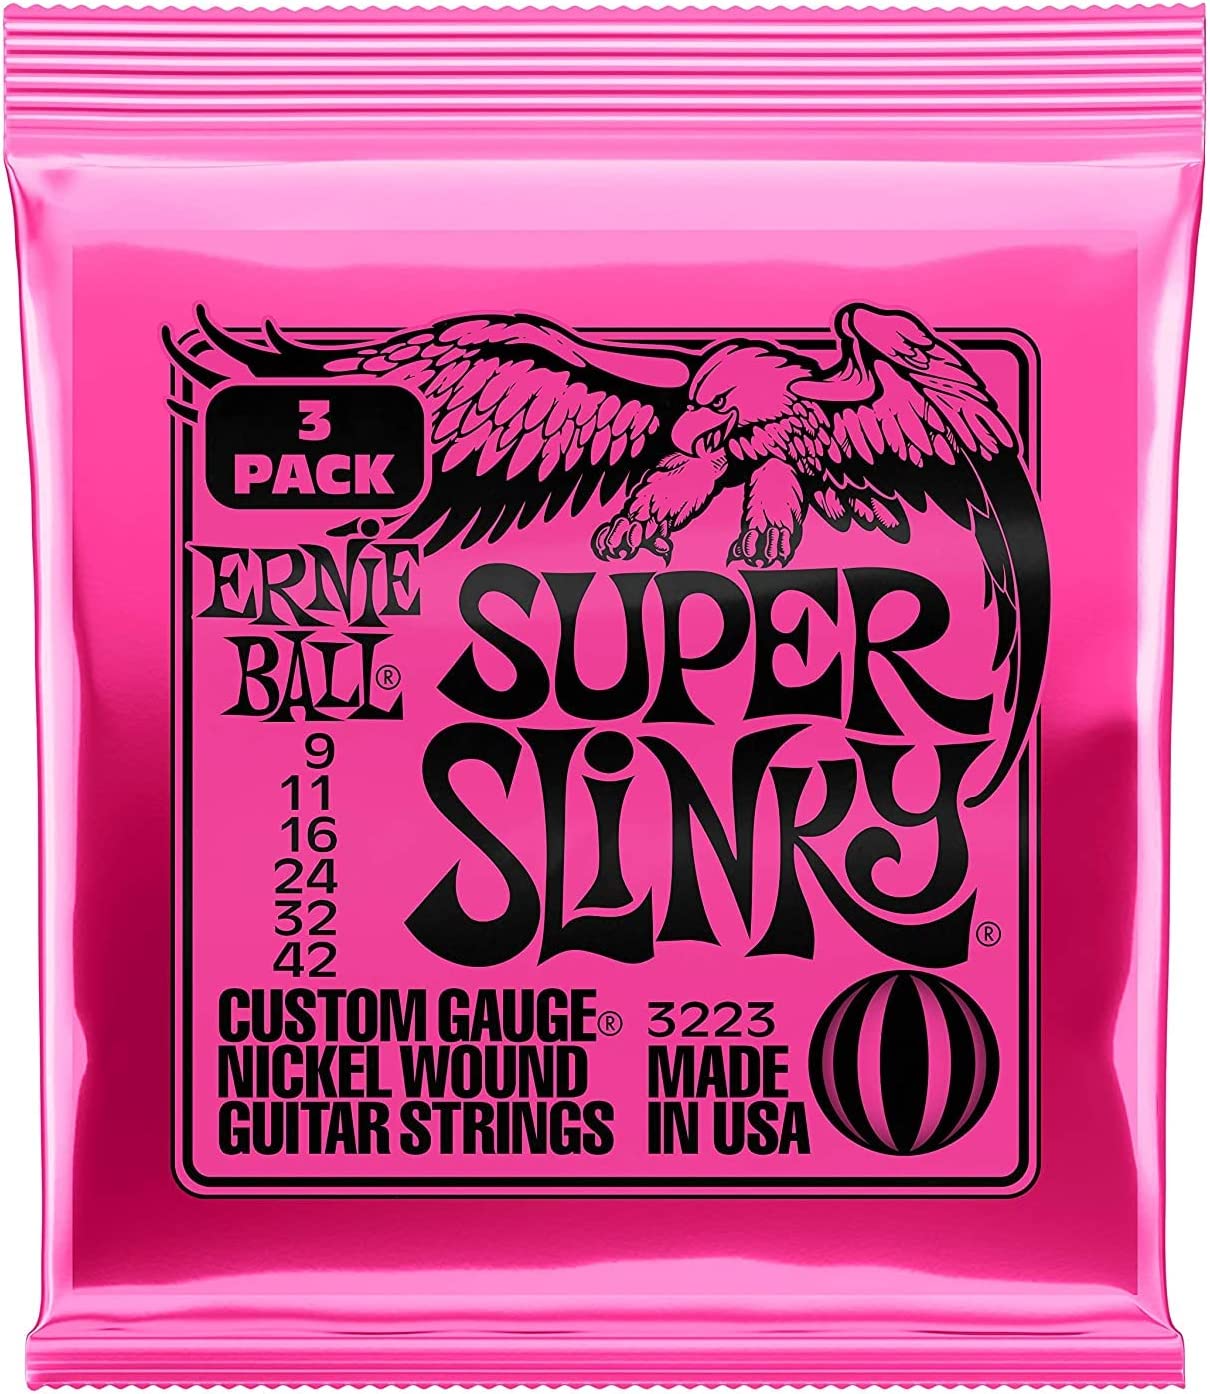 Ernie Ball Super Slinky Nickel Wound Electric Guitar Strings on a white background